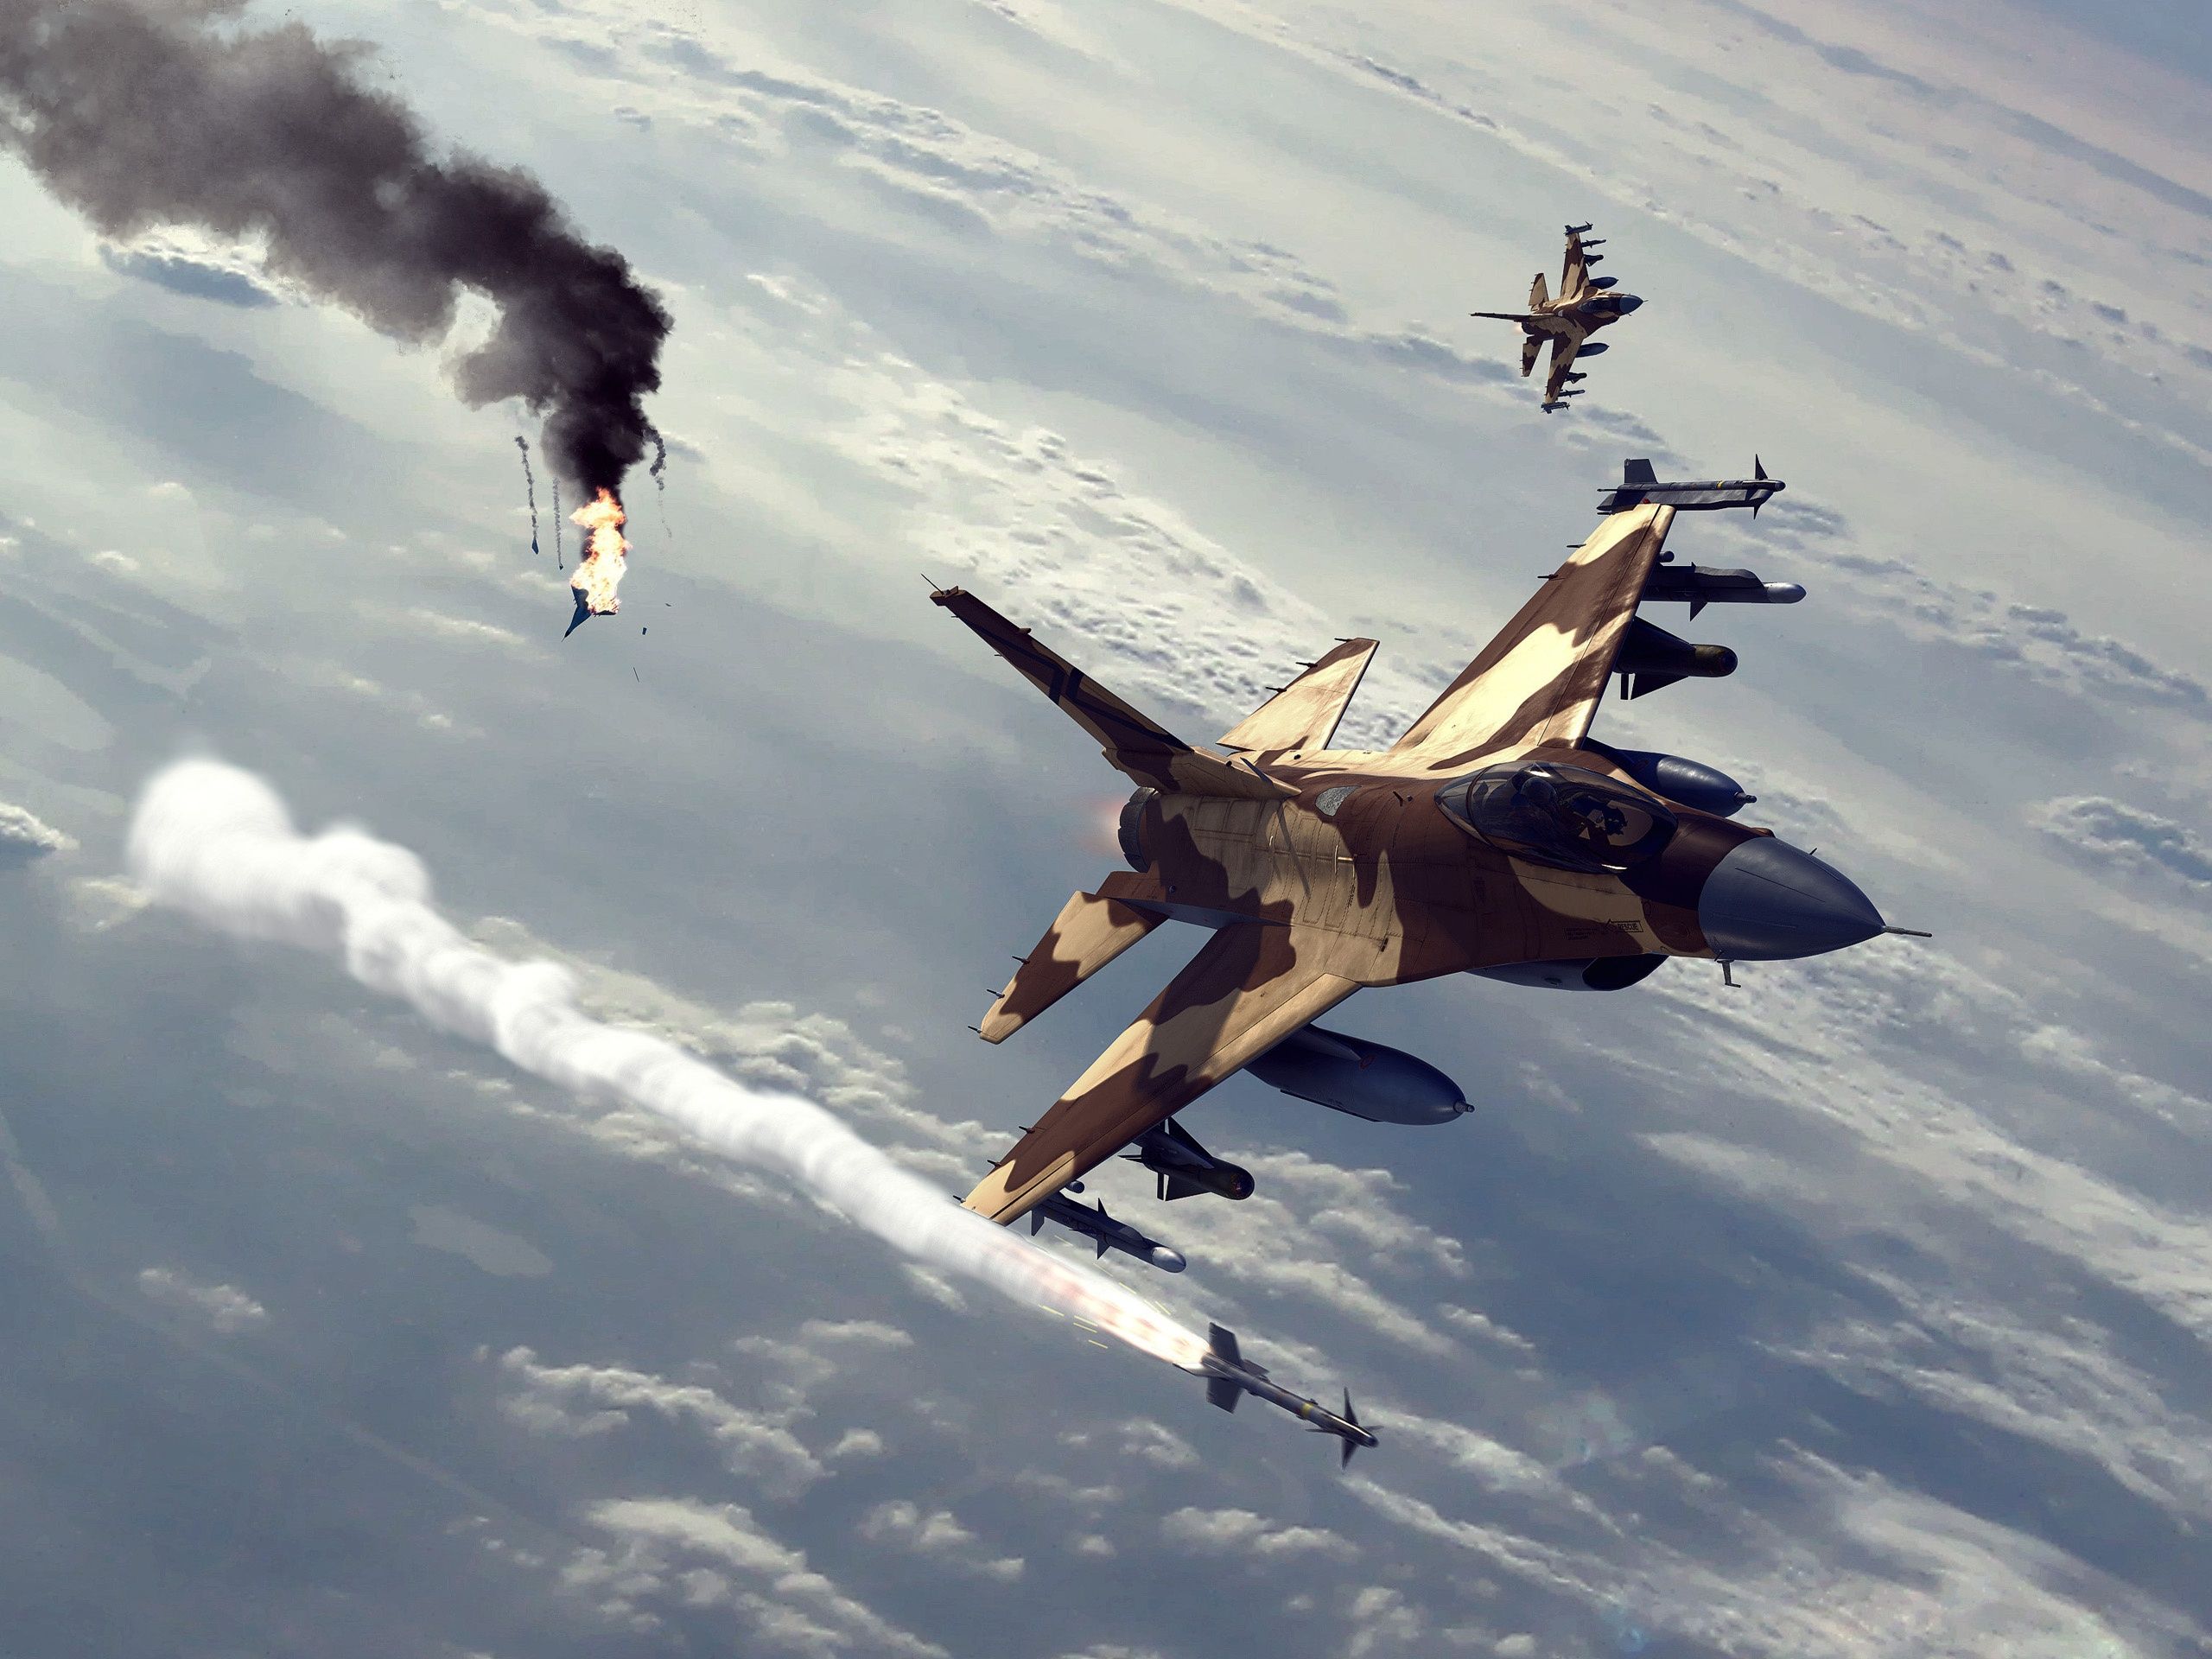 Wallpaper Fighter air battle 2560x1920 HD Picture, Image